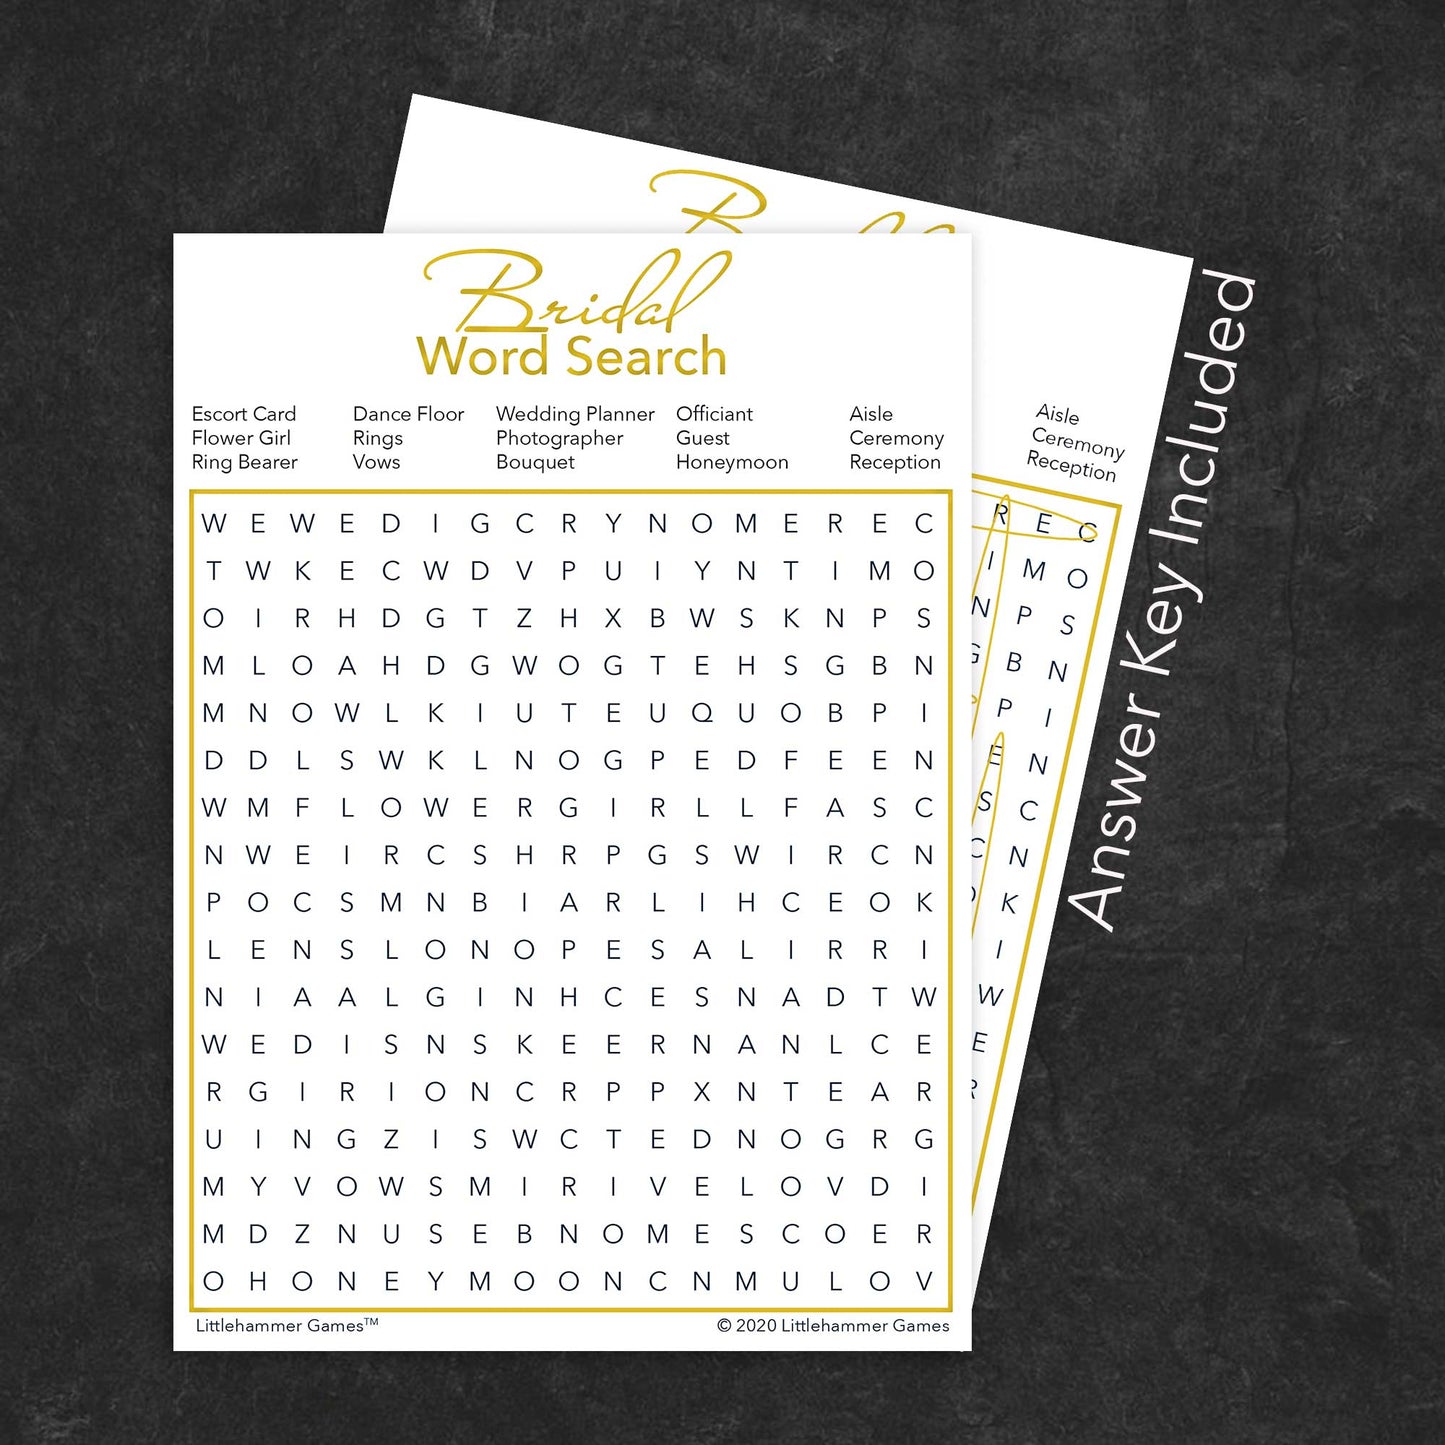 Bridal Word Search game card with a gold and white background with answer card tucked behind it on a slate background with white text that says "Answer Key Included"